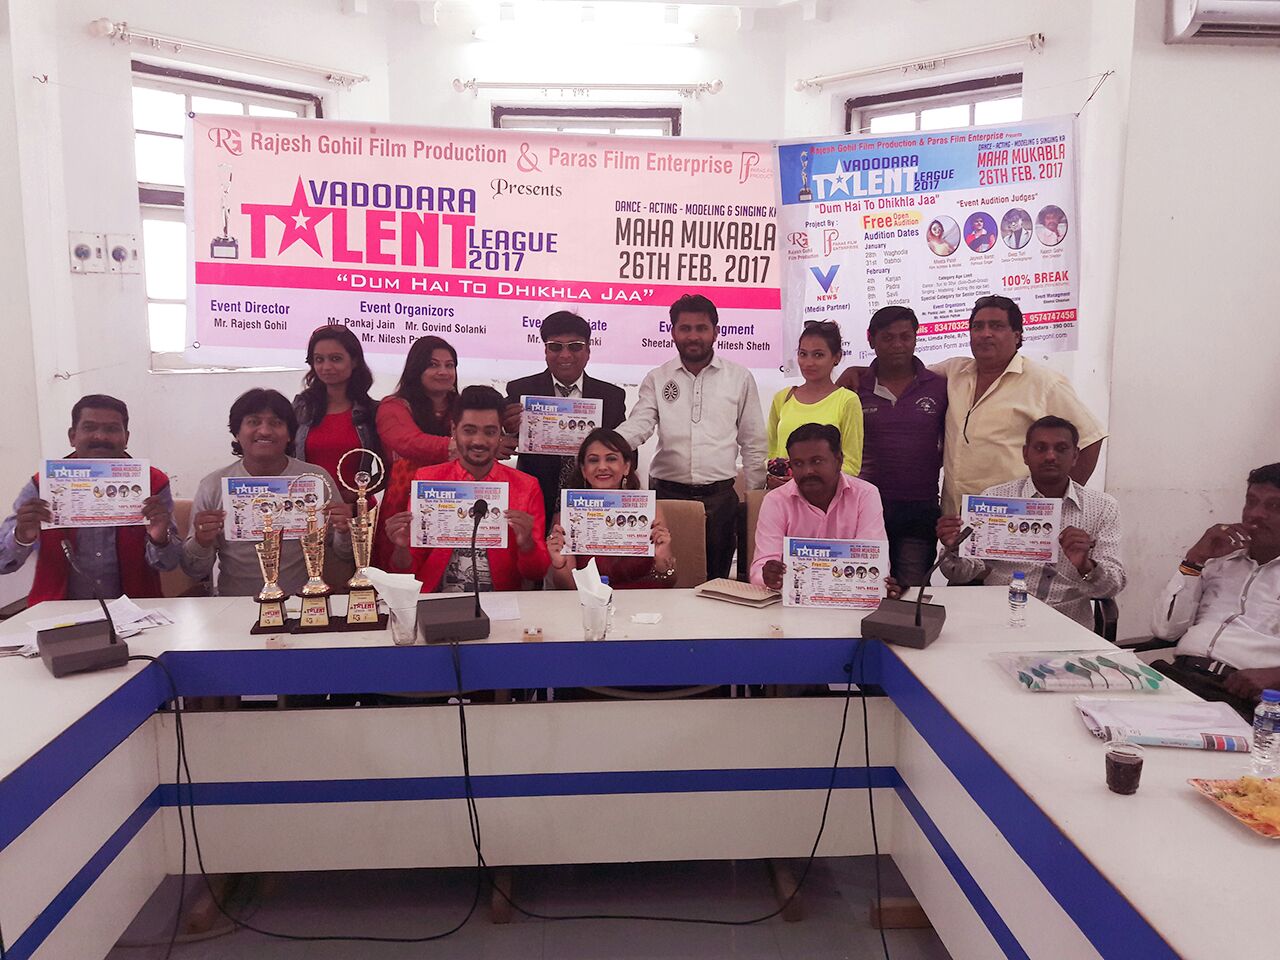 Talent league to find rural talents in Vadodara district